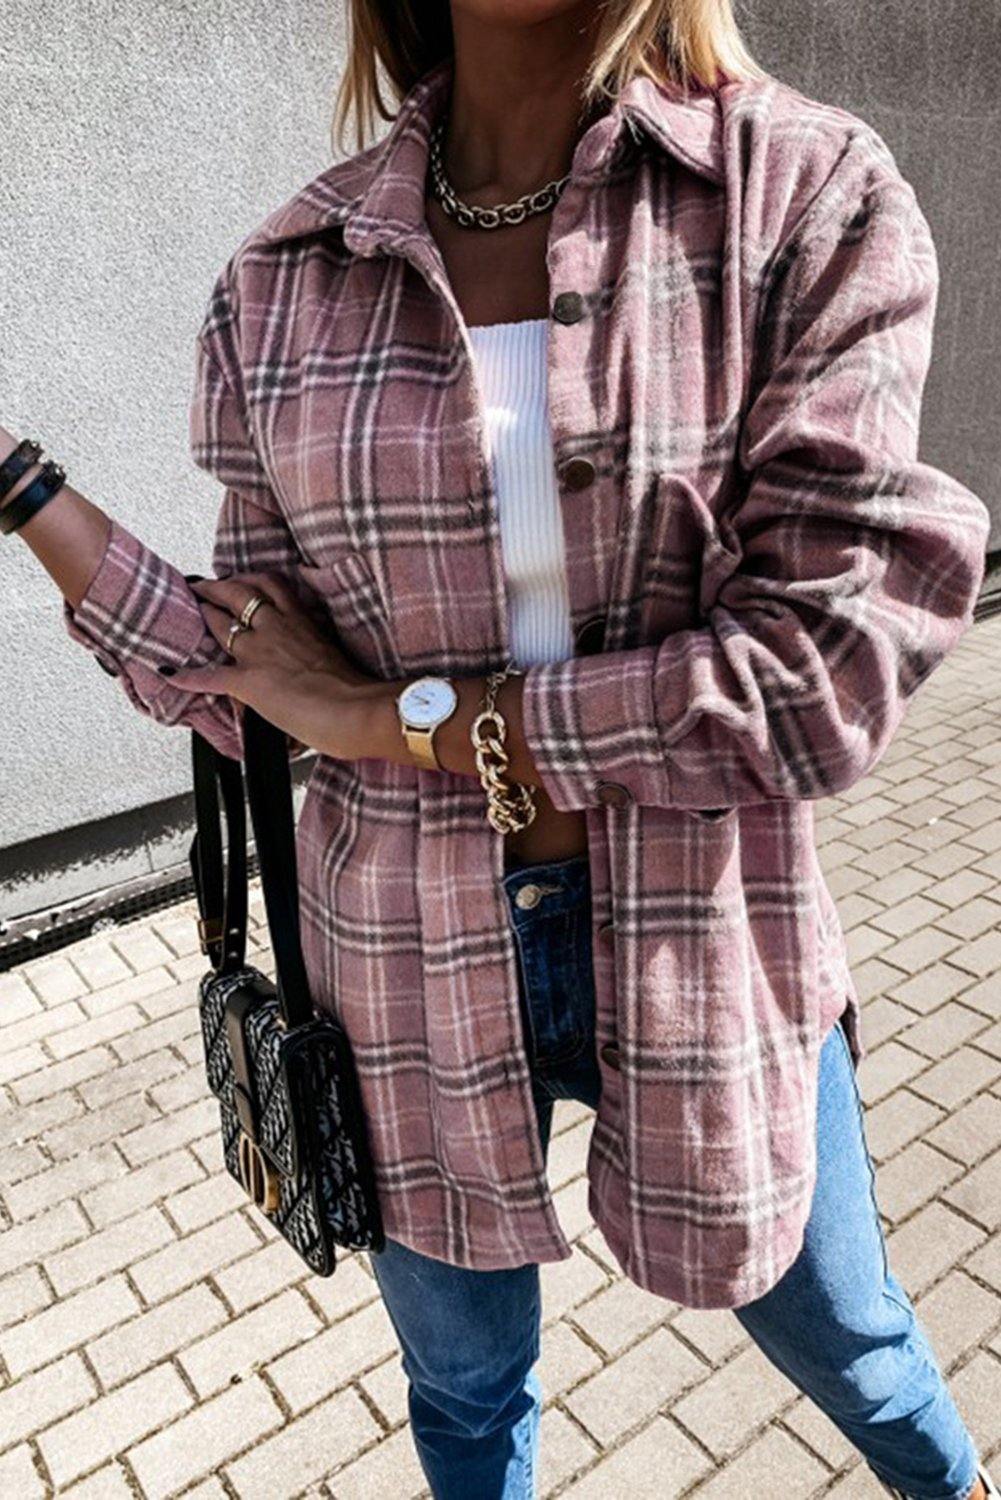 Plaid Pattern Buttoned Shirt Coat with Slits - L & M Kee, LLC